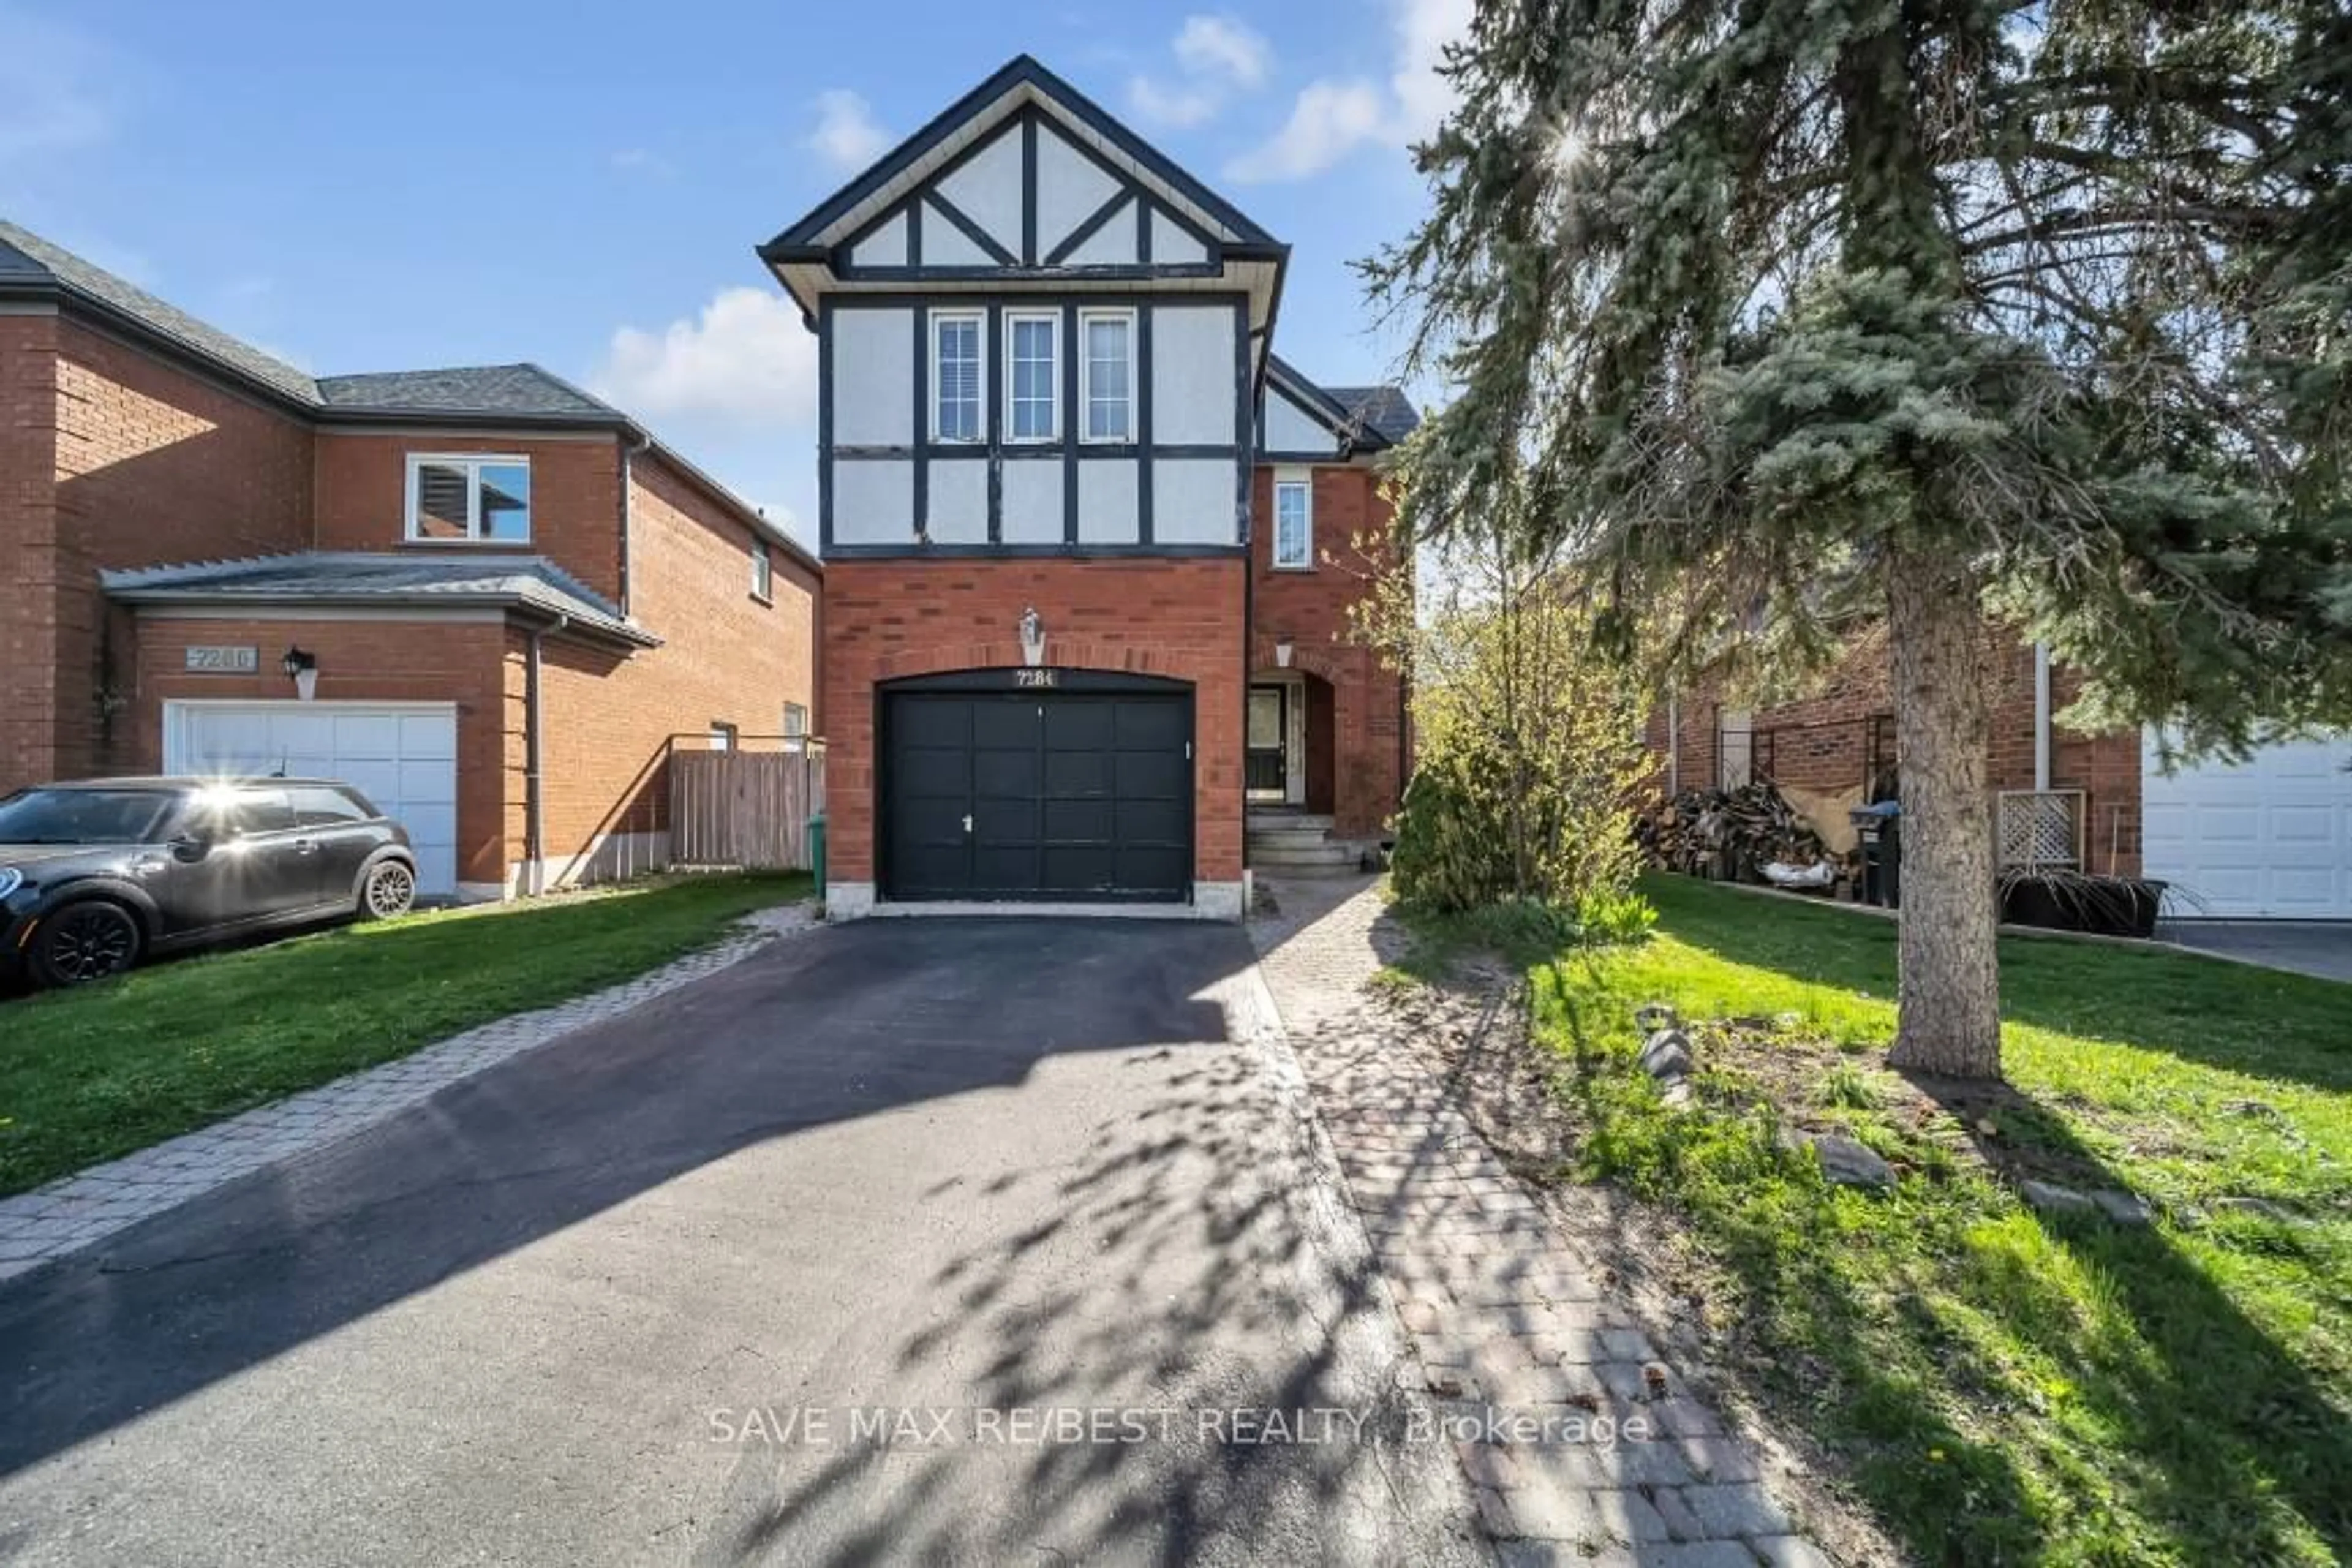 Home with brick exterior material for 7284 Seabreeze Dr, Mississauga Ontario L5N 6K6